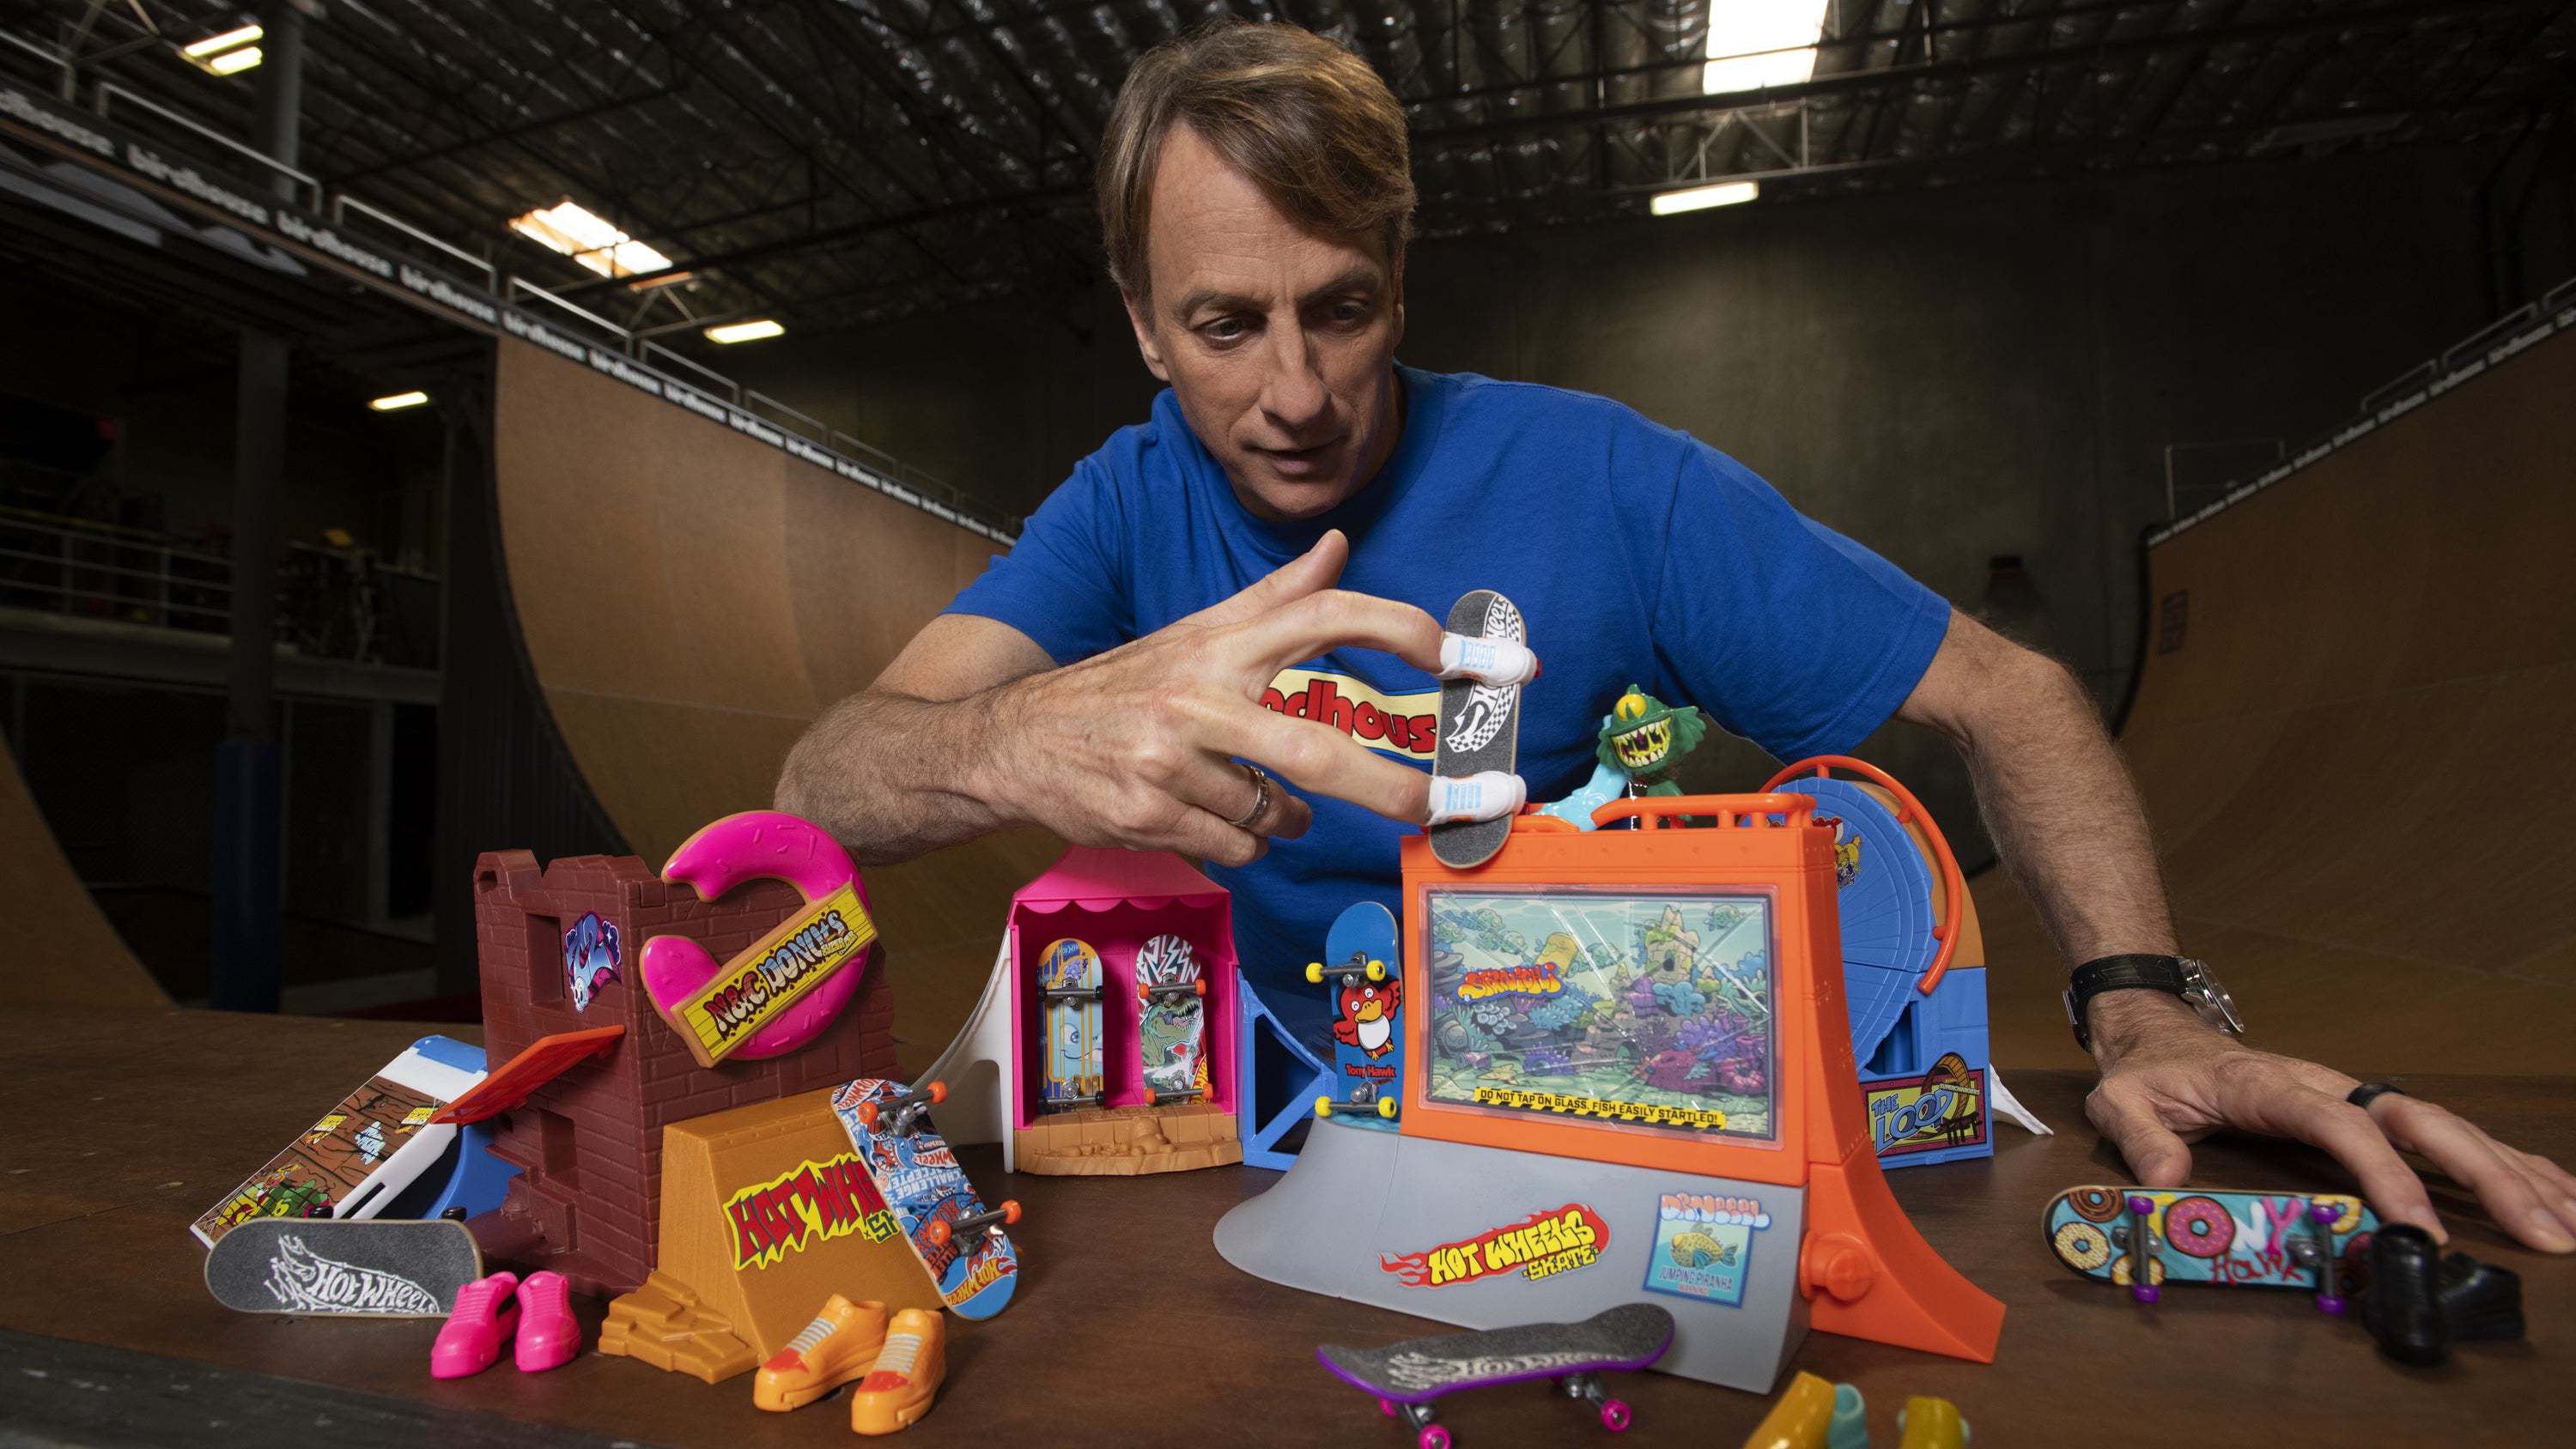 Hot Wheels and Tony Hawk are making fingerboards, and they come with tiny  fingershoes 